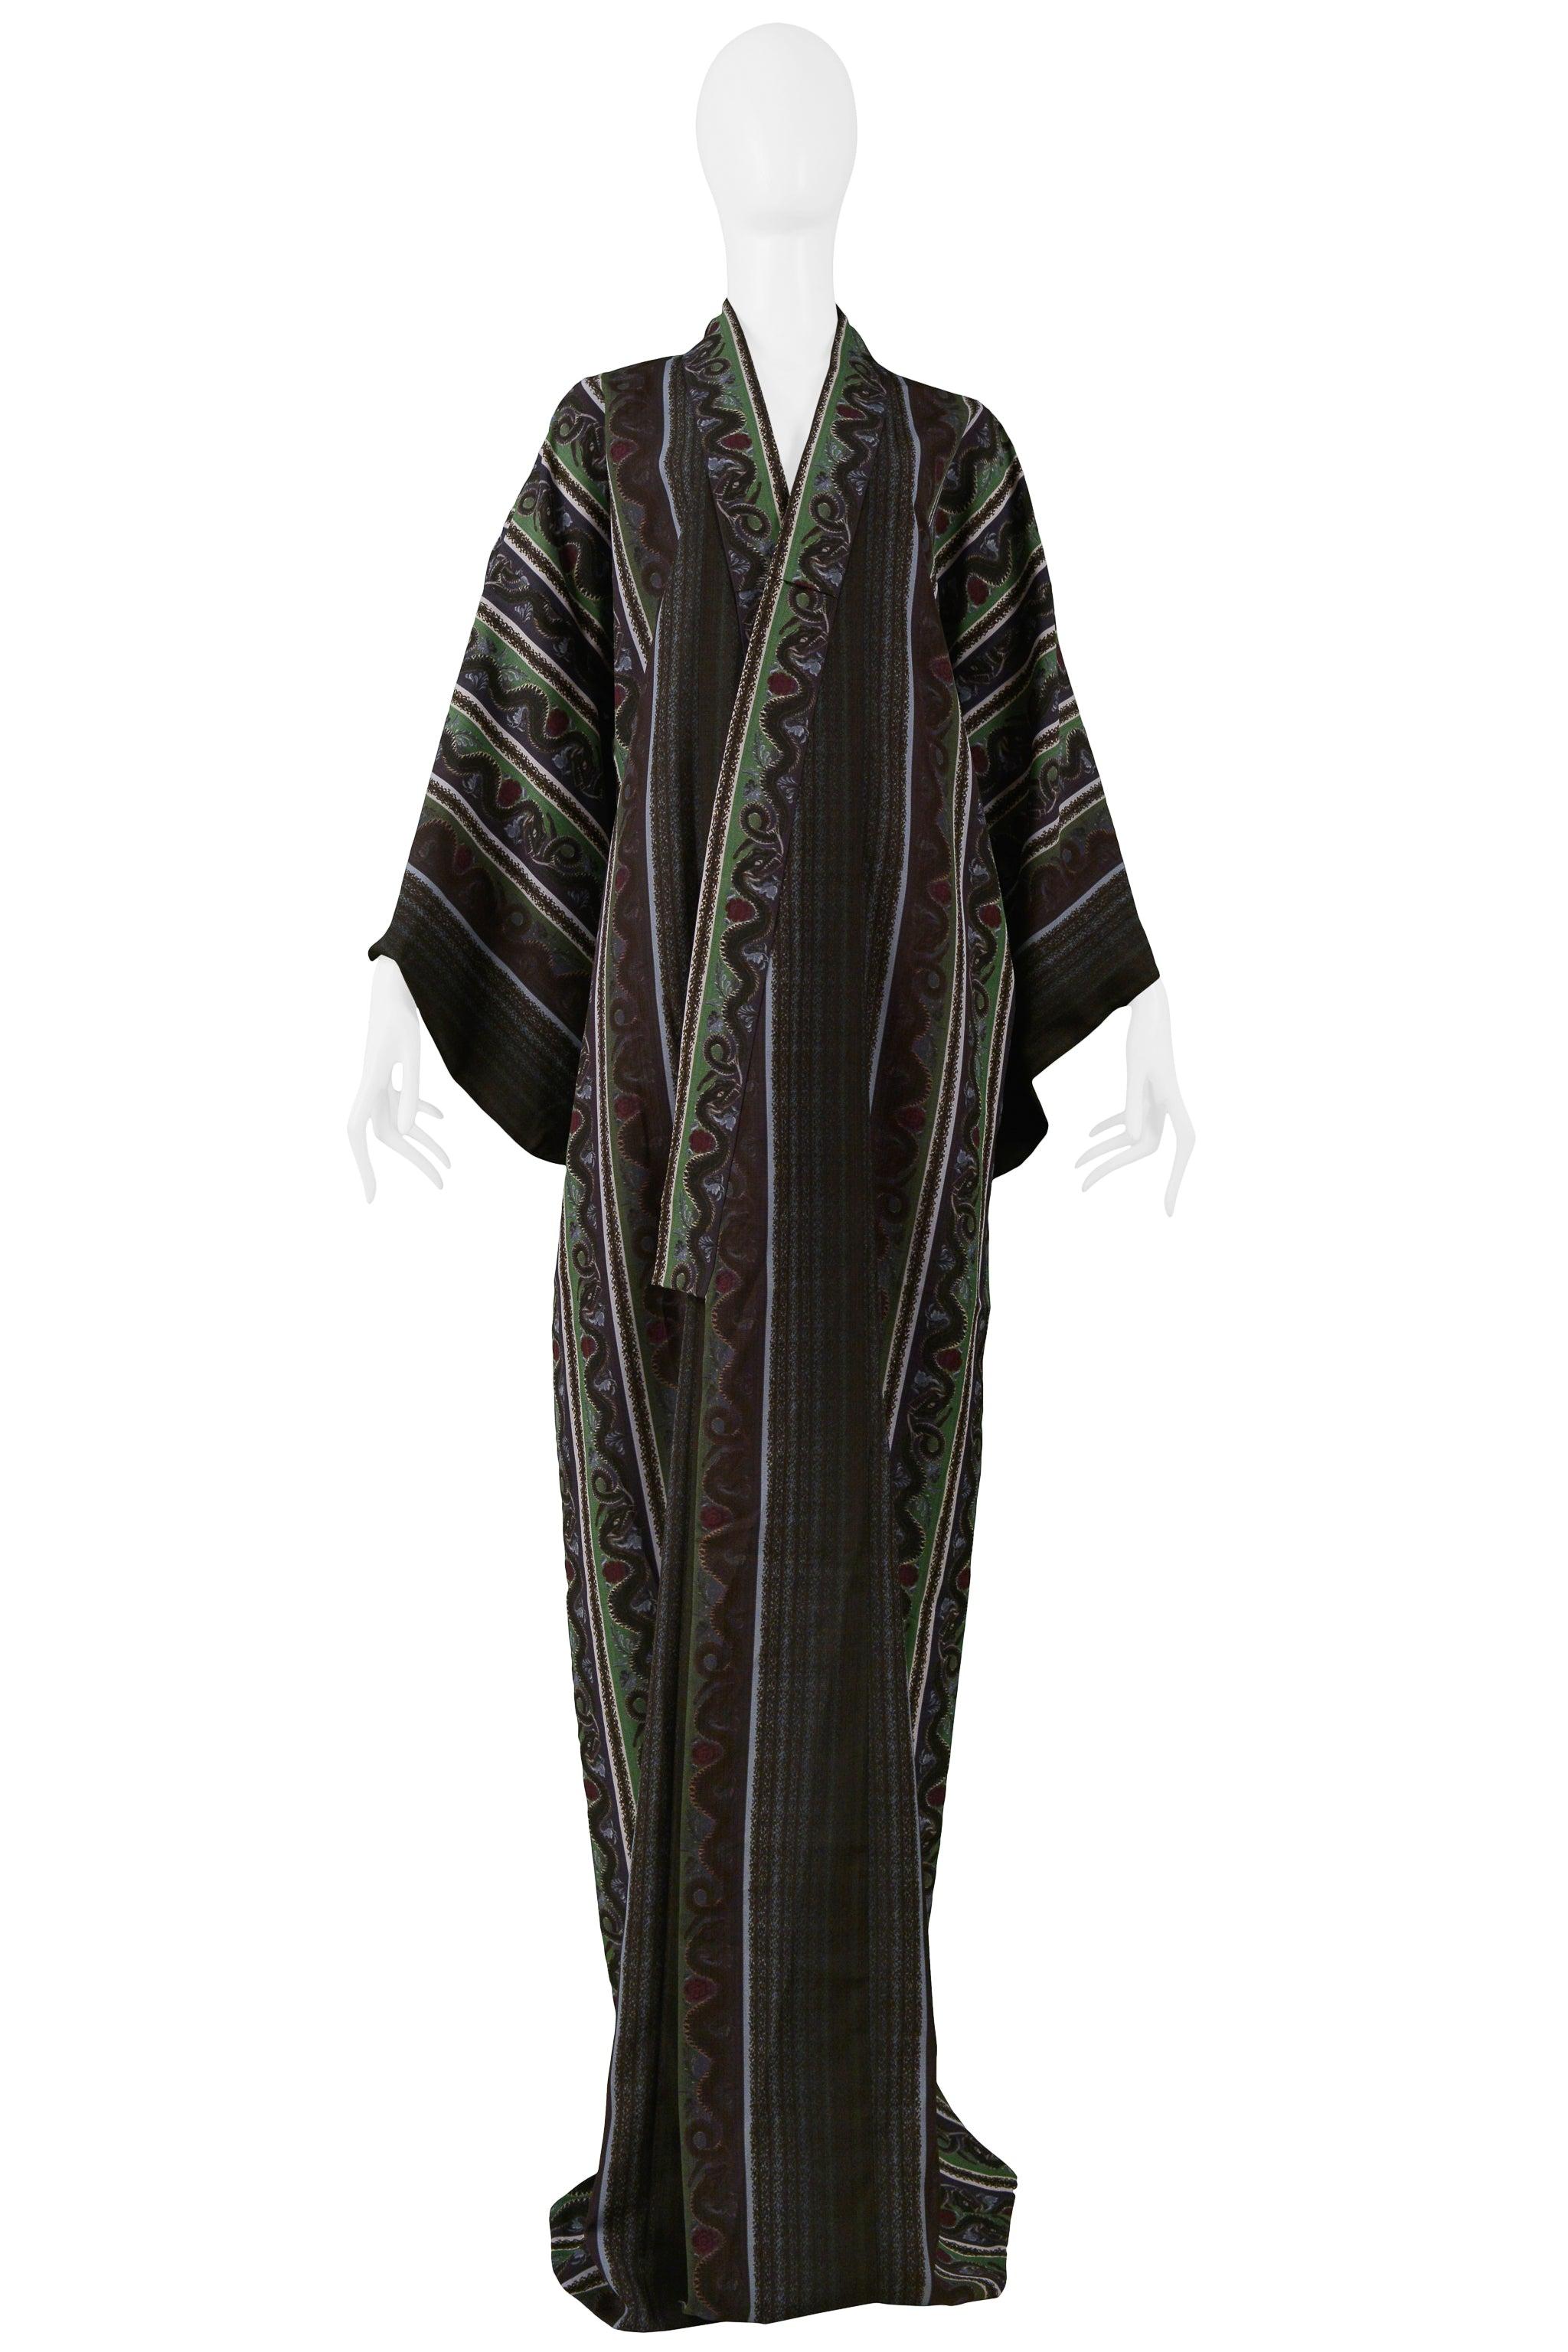 Resurrection Vintage is excited to offer a vintage Jean Paul Gaultier green & brown summer Yukata with serpent print. This collection was produced exclusively for the Japanese market in 2002. Textile designs and palettes were a personal design